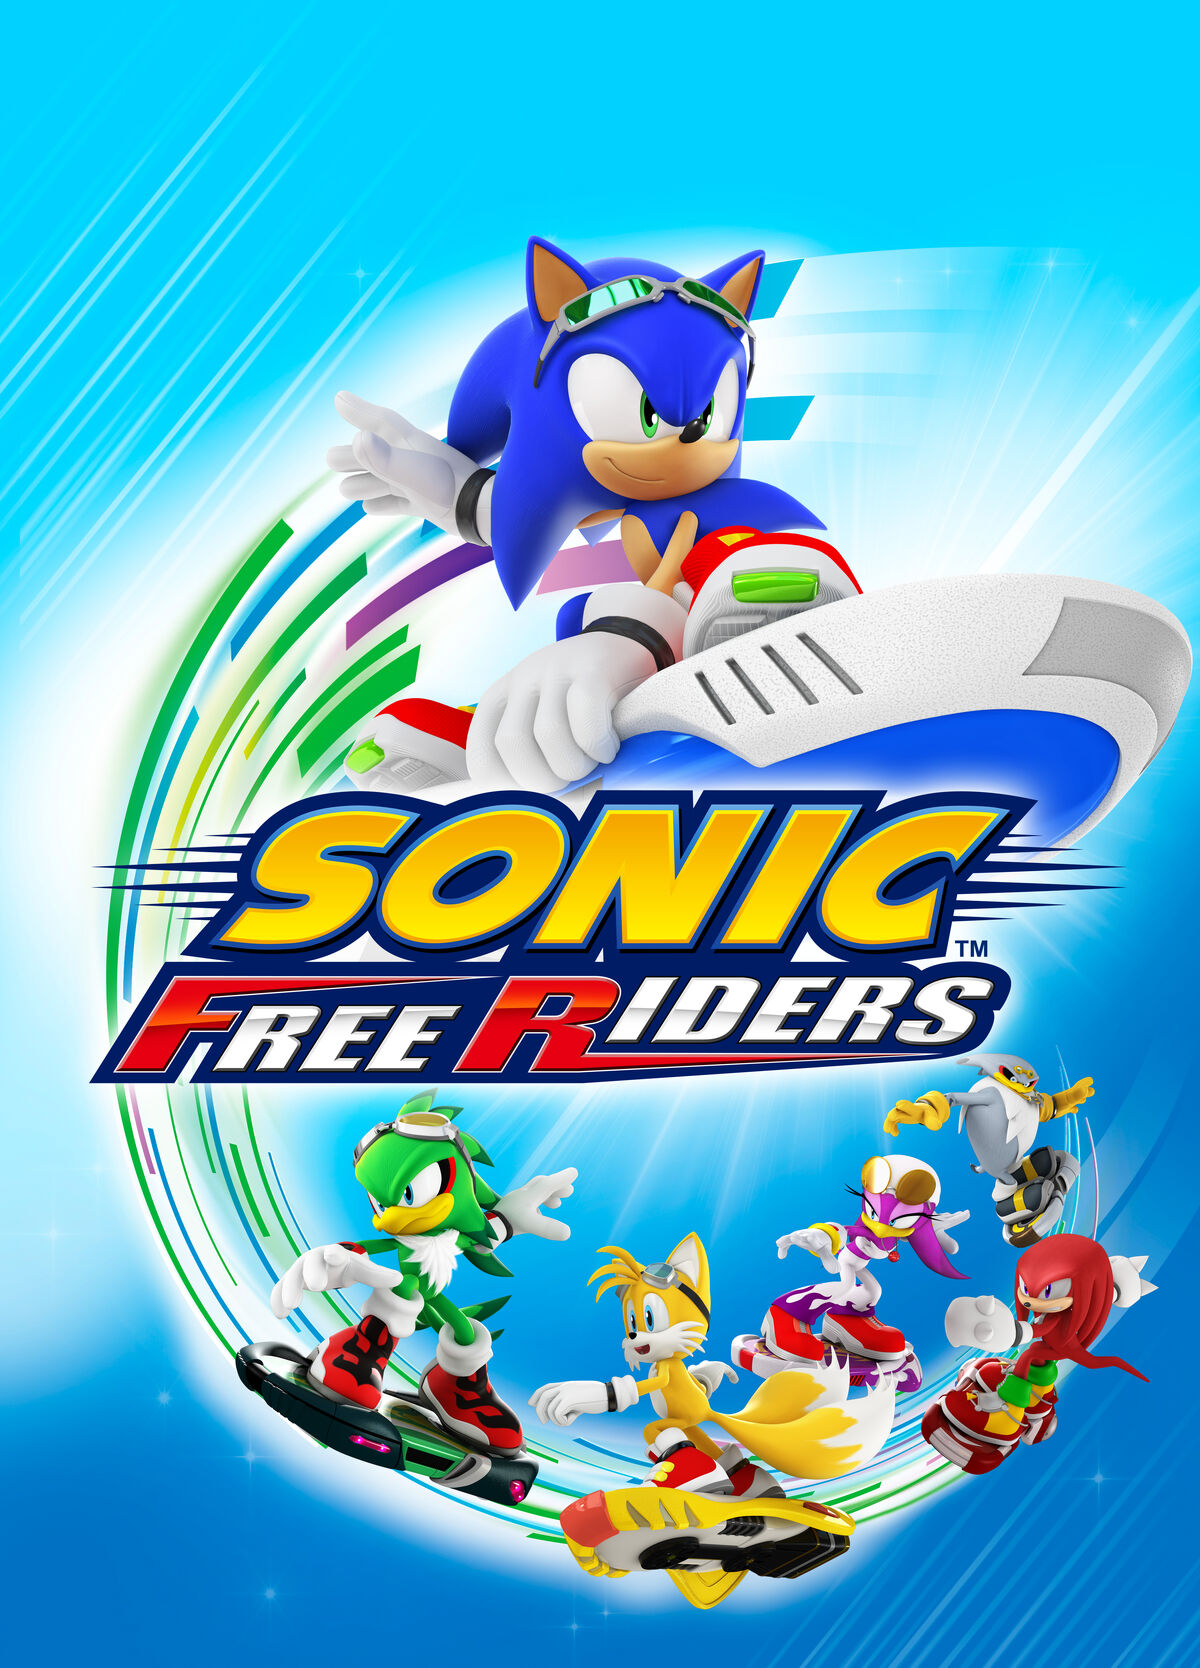 Sonic Free Riders Microsoft Xbox 360 Kinect Game - Tested